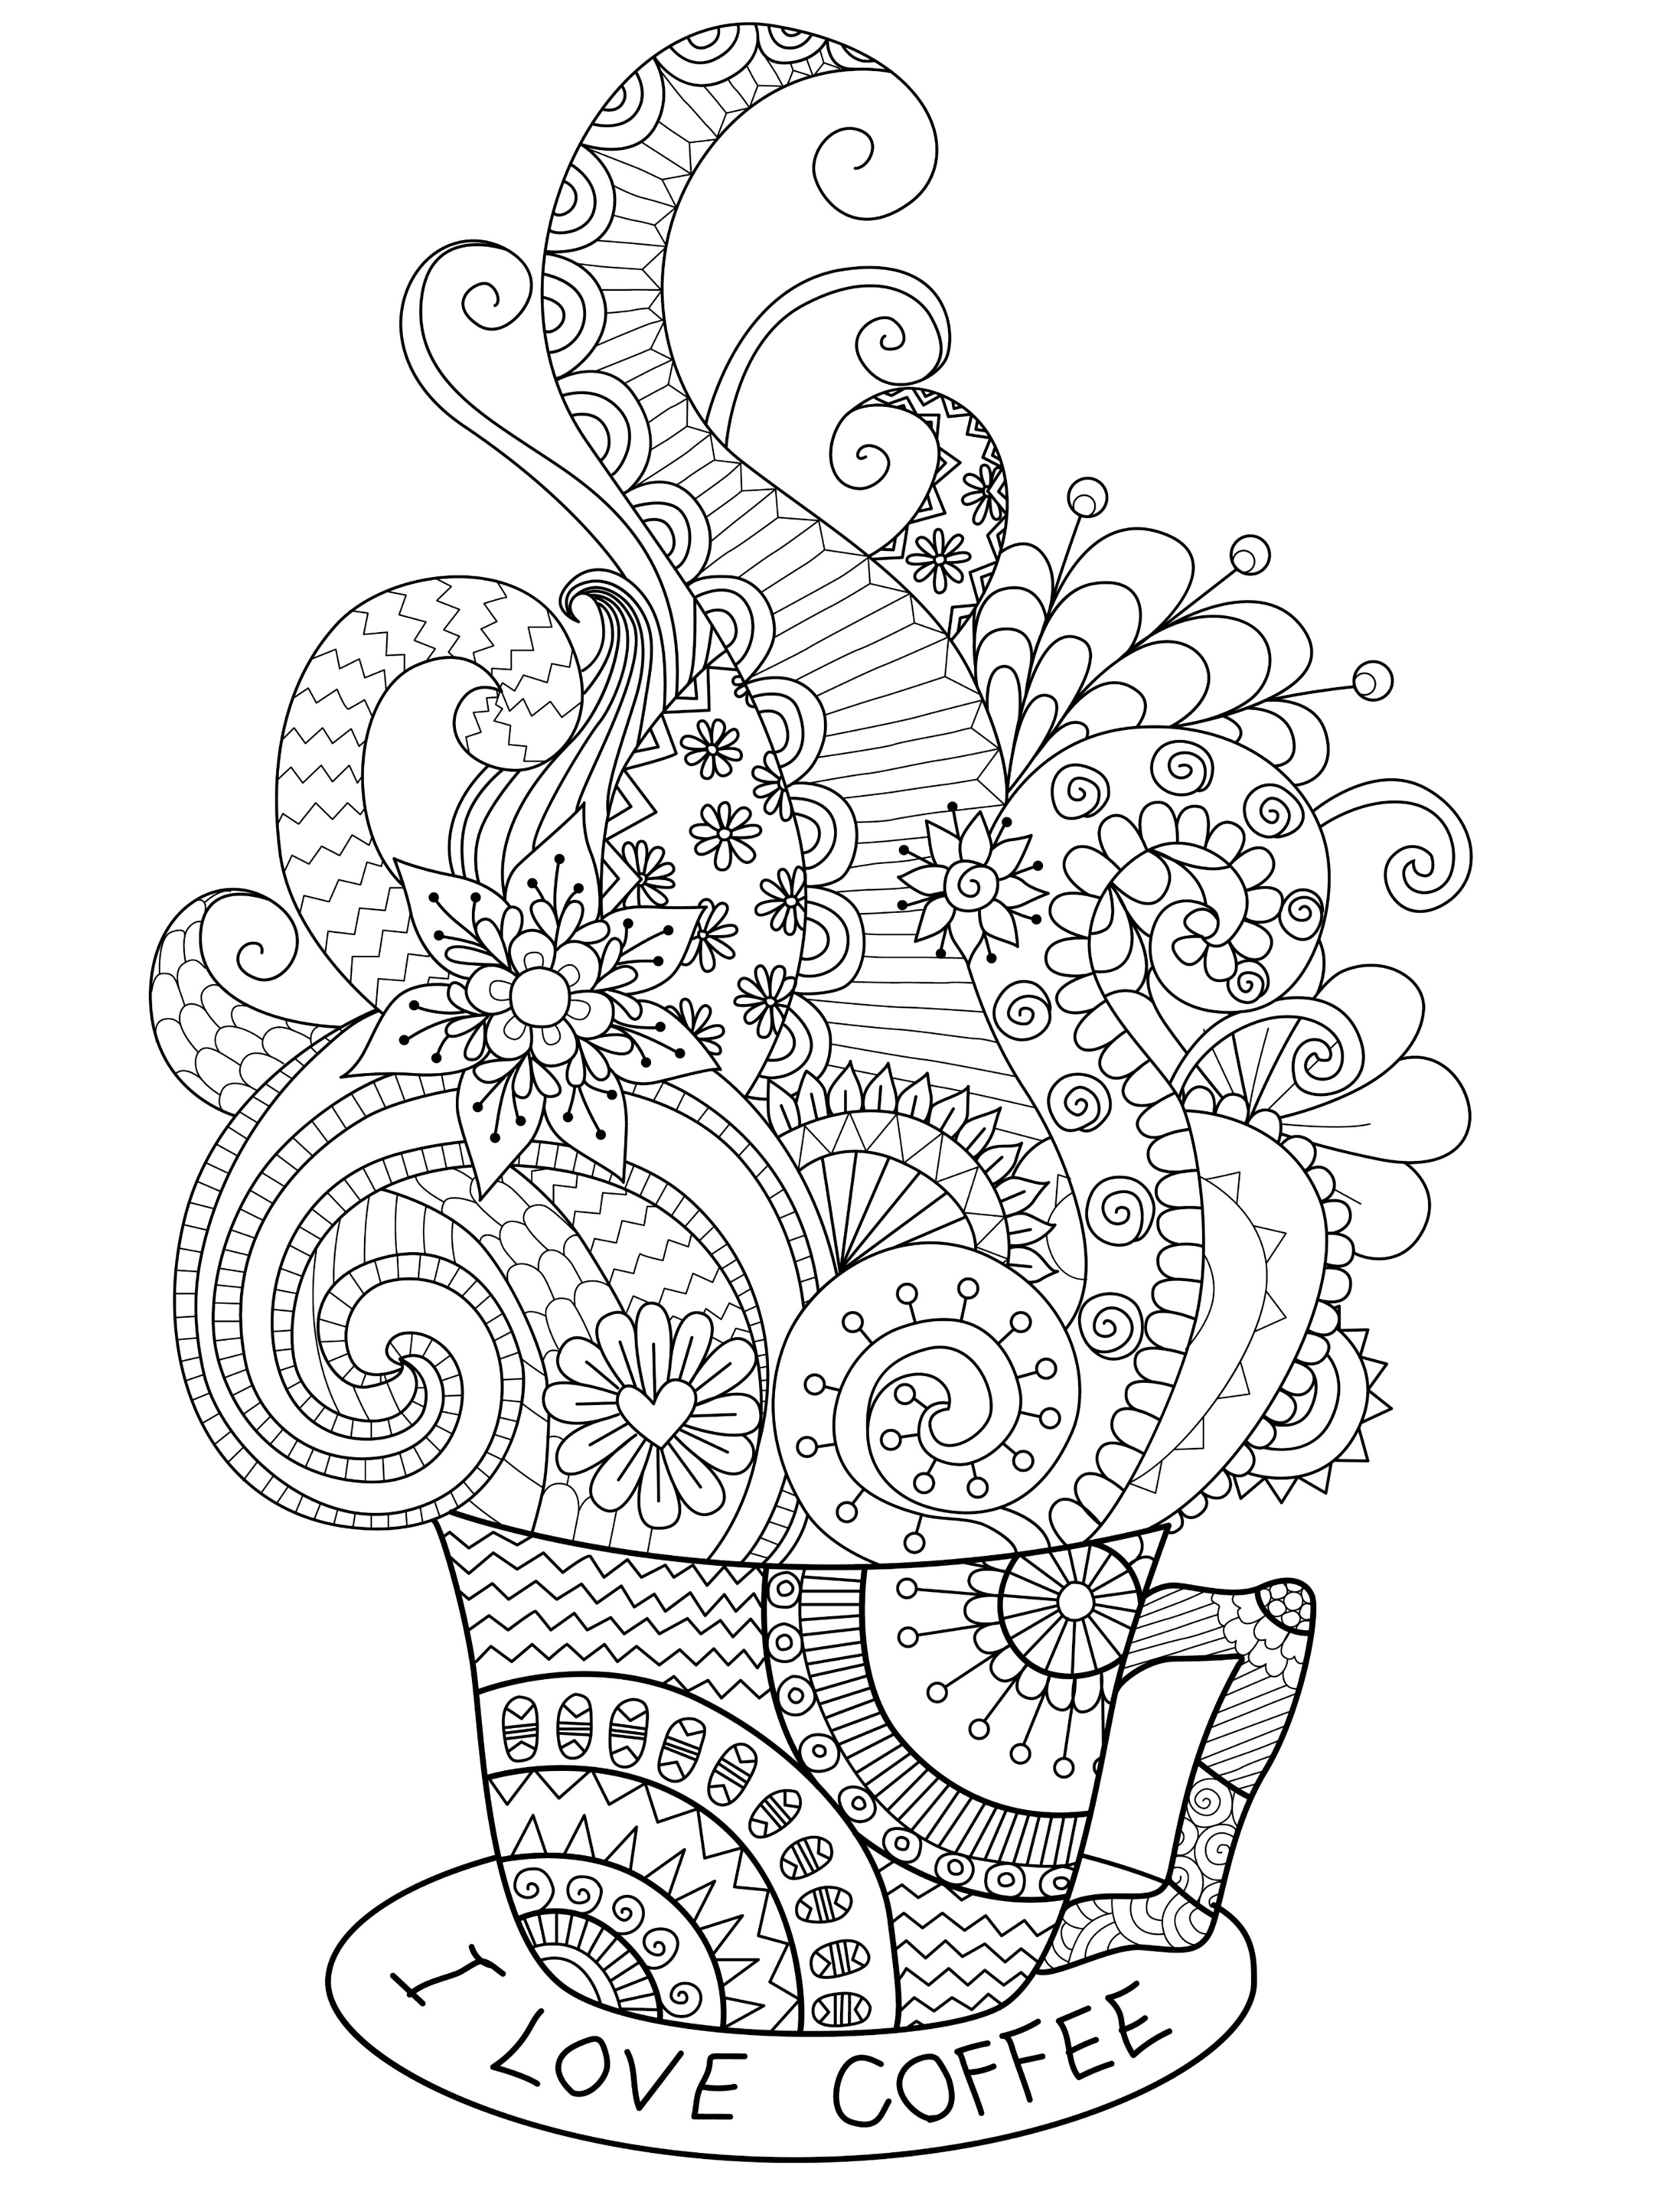 Coffee Shop Coloring Pages at GetDrawings.com | Free for ...